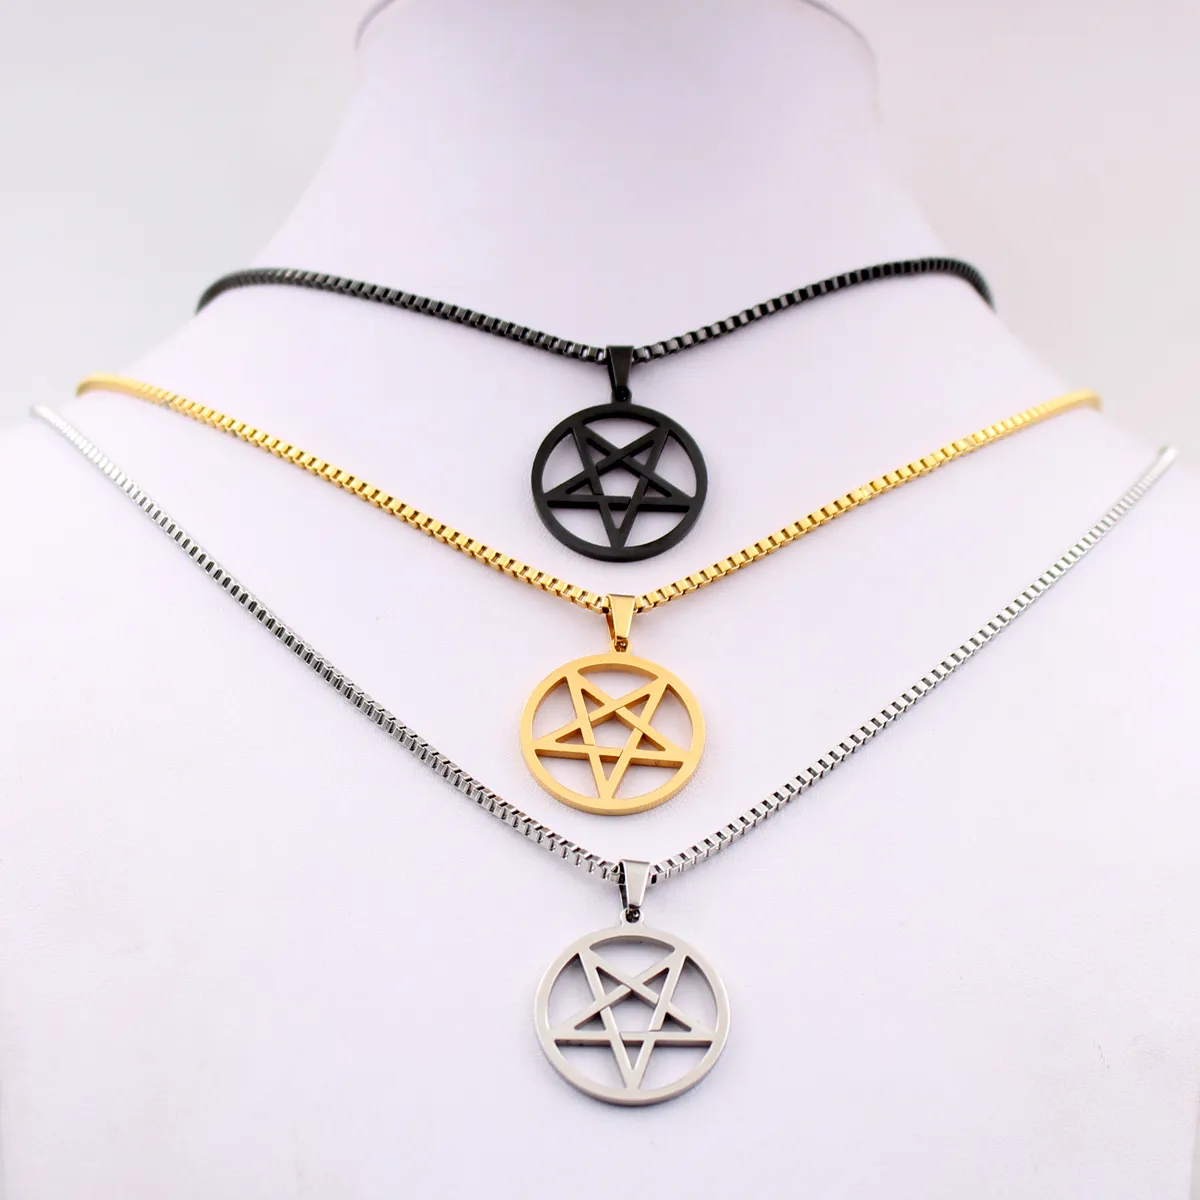 pentagram satanic symbol Satan worship Wicca Pentacle stainless steel pendant necklace Silver gold black 2 4mm 24 inch box chain f253D